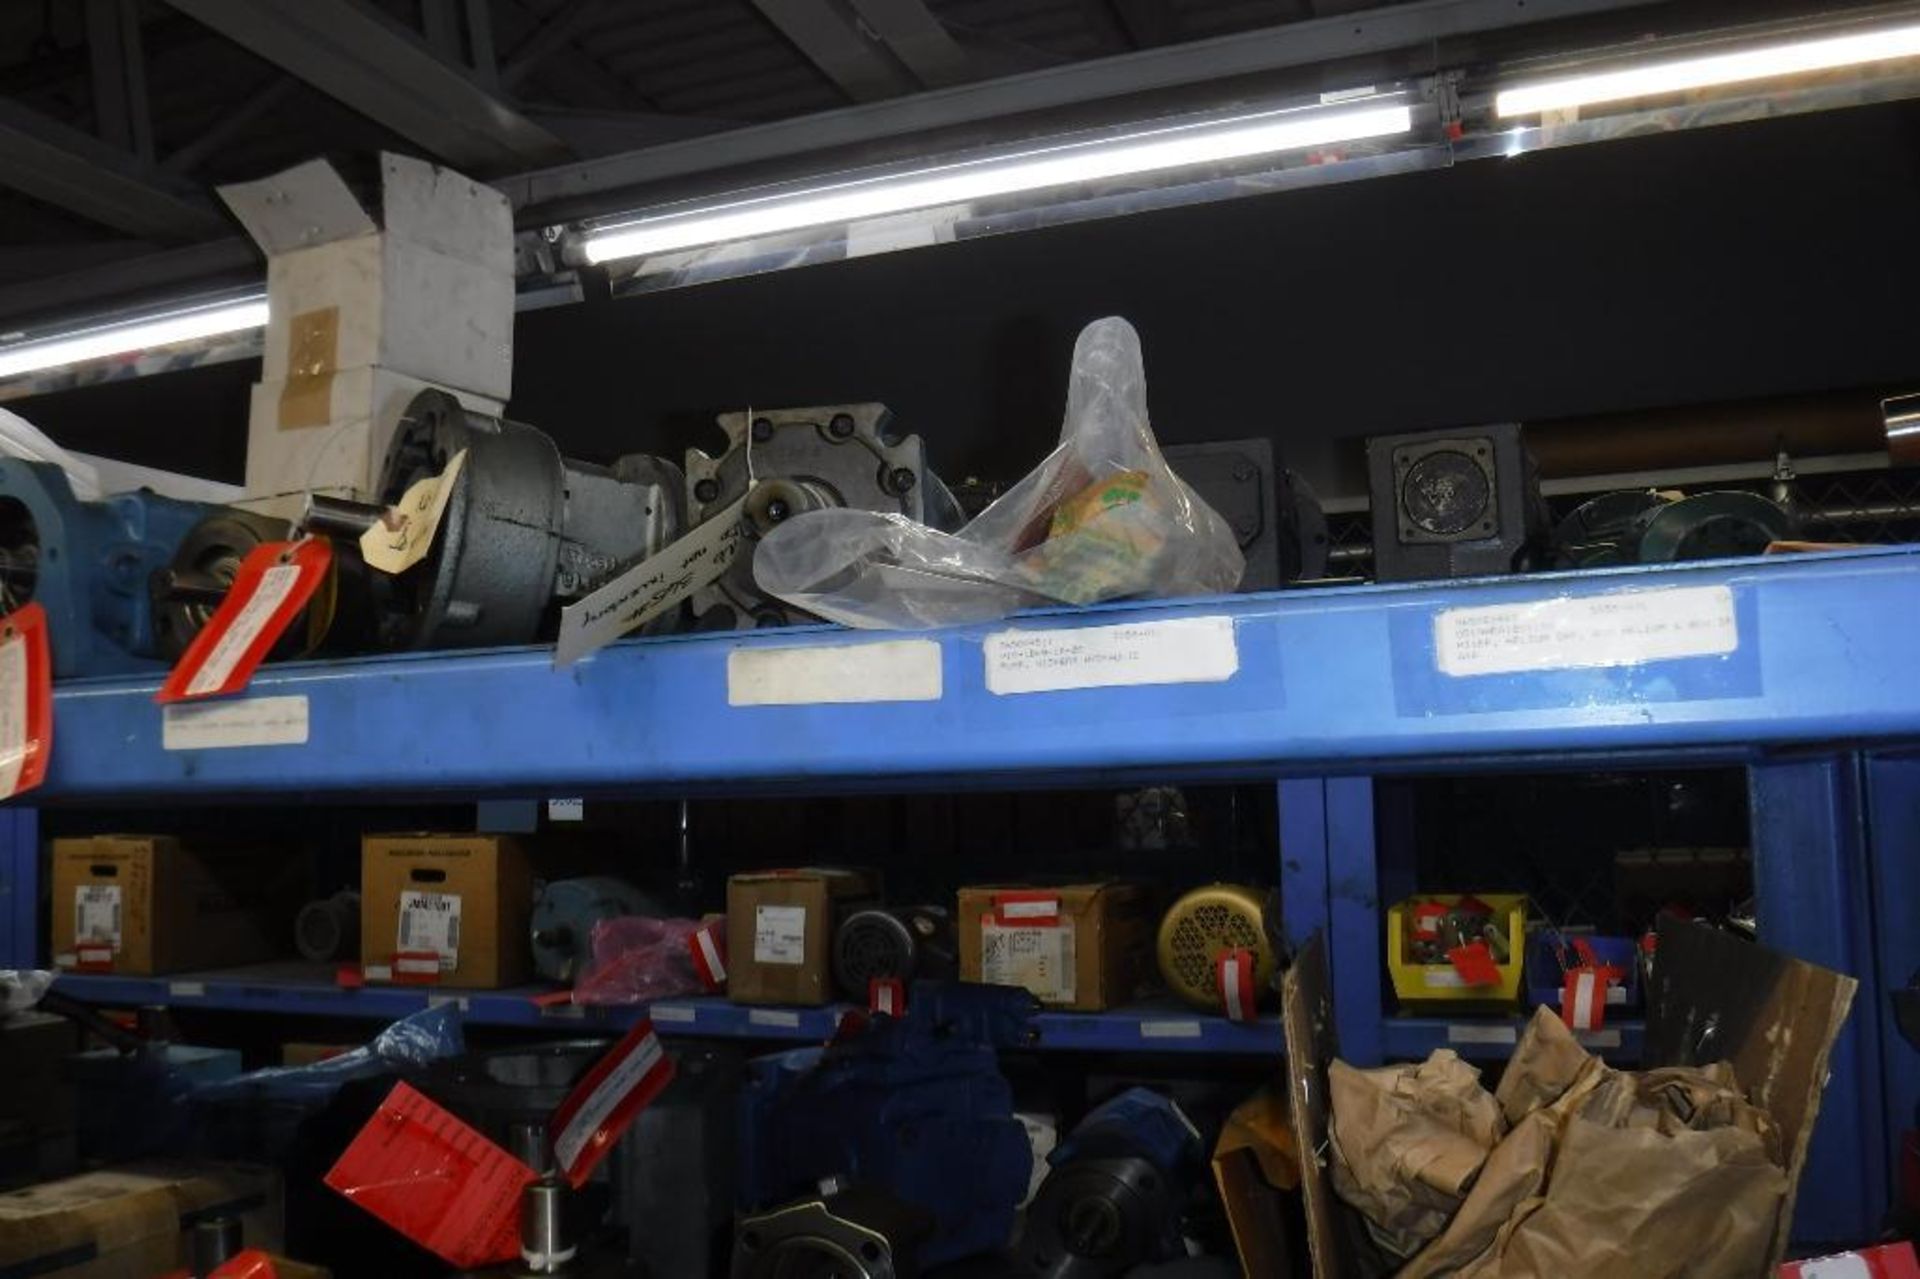 Contents of Rack 505S-Gear Boxes, Pumps, Etc., MUST REMOVE BY 2/14/20-MUST BE REMOVED IN THE ENTIRIT - Image 20 of 34